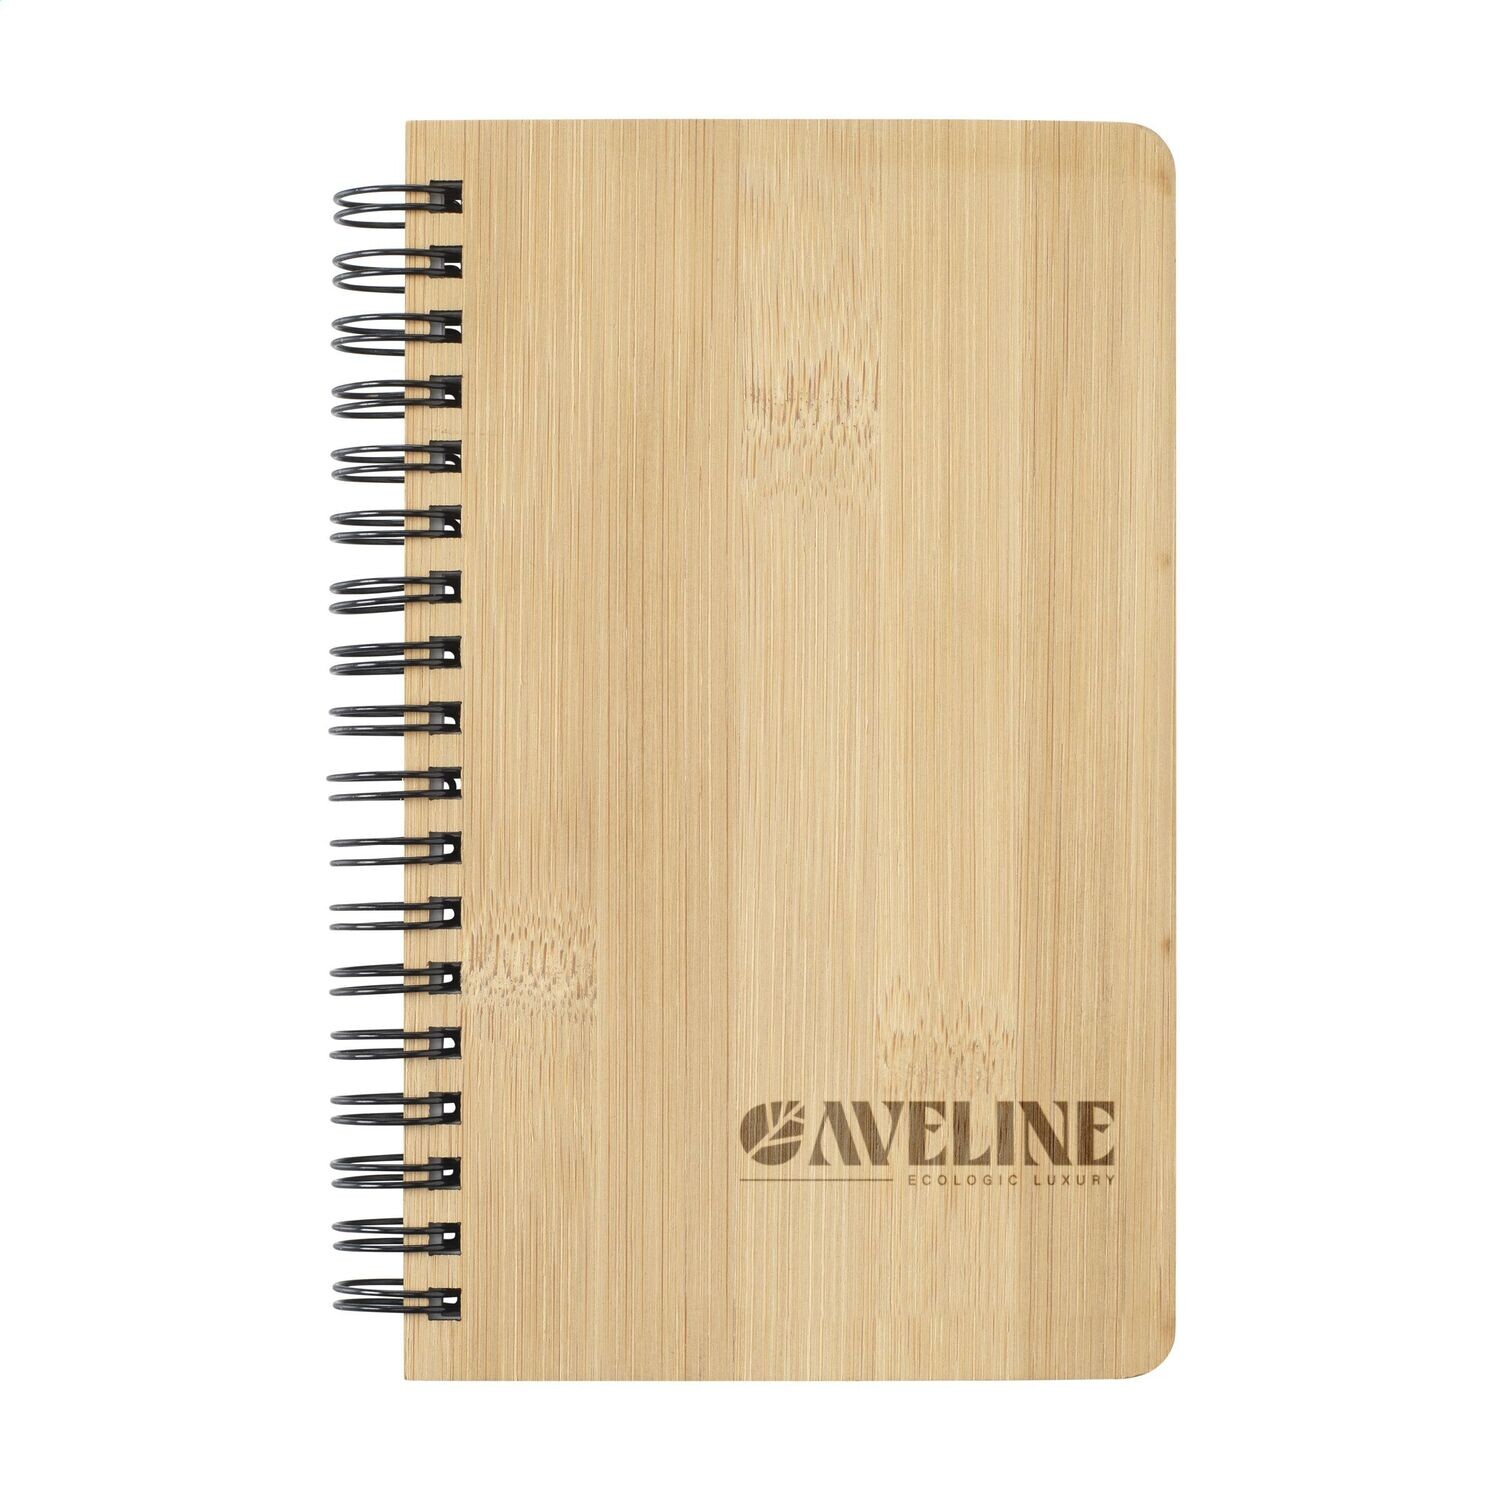 Notebook made from Stonewaste-Bamboo A6 notatbok